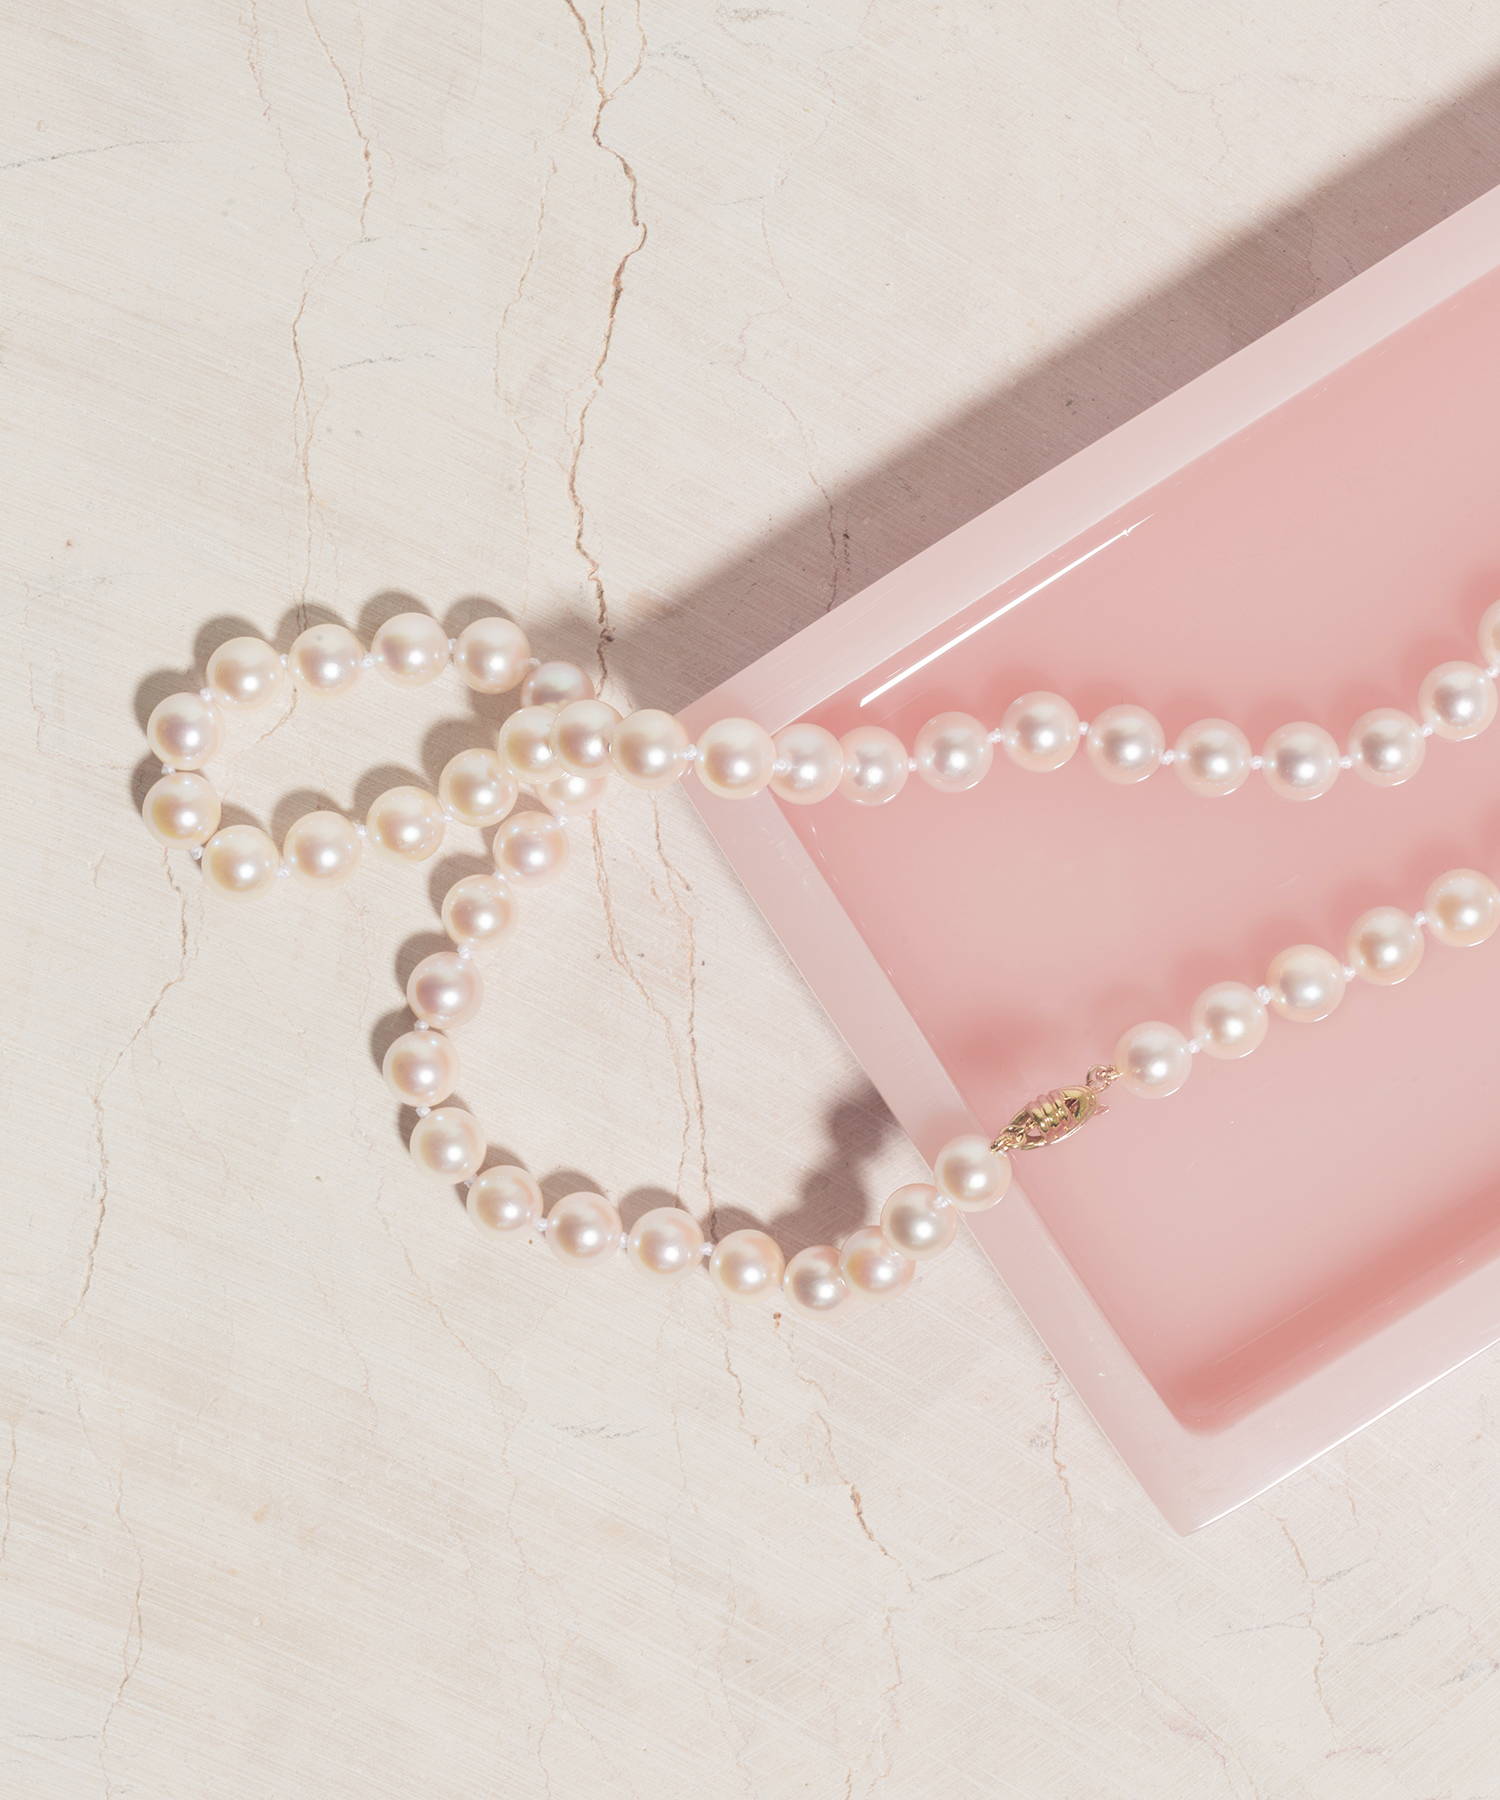 White cultured pearl necklace on a pink tray with a marble countertop